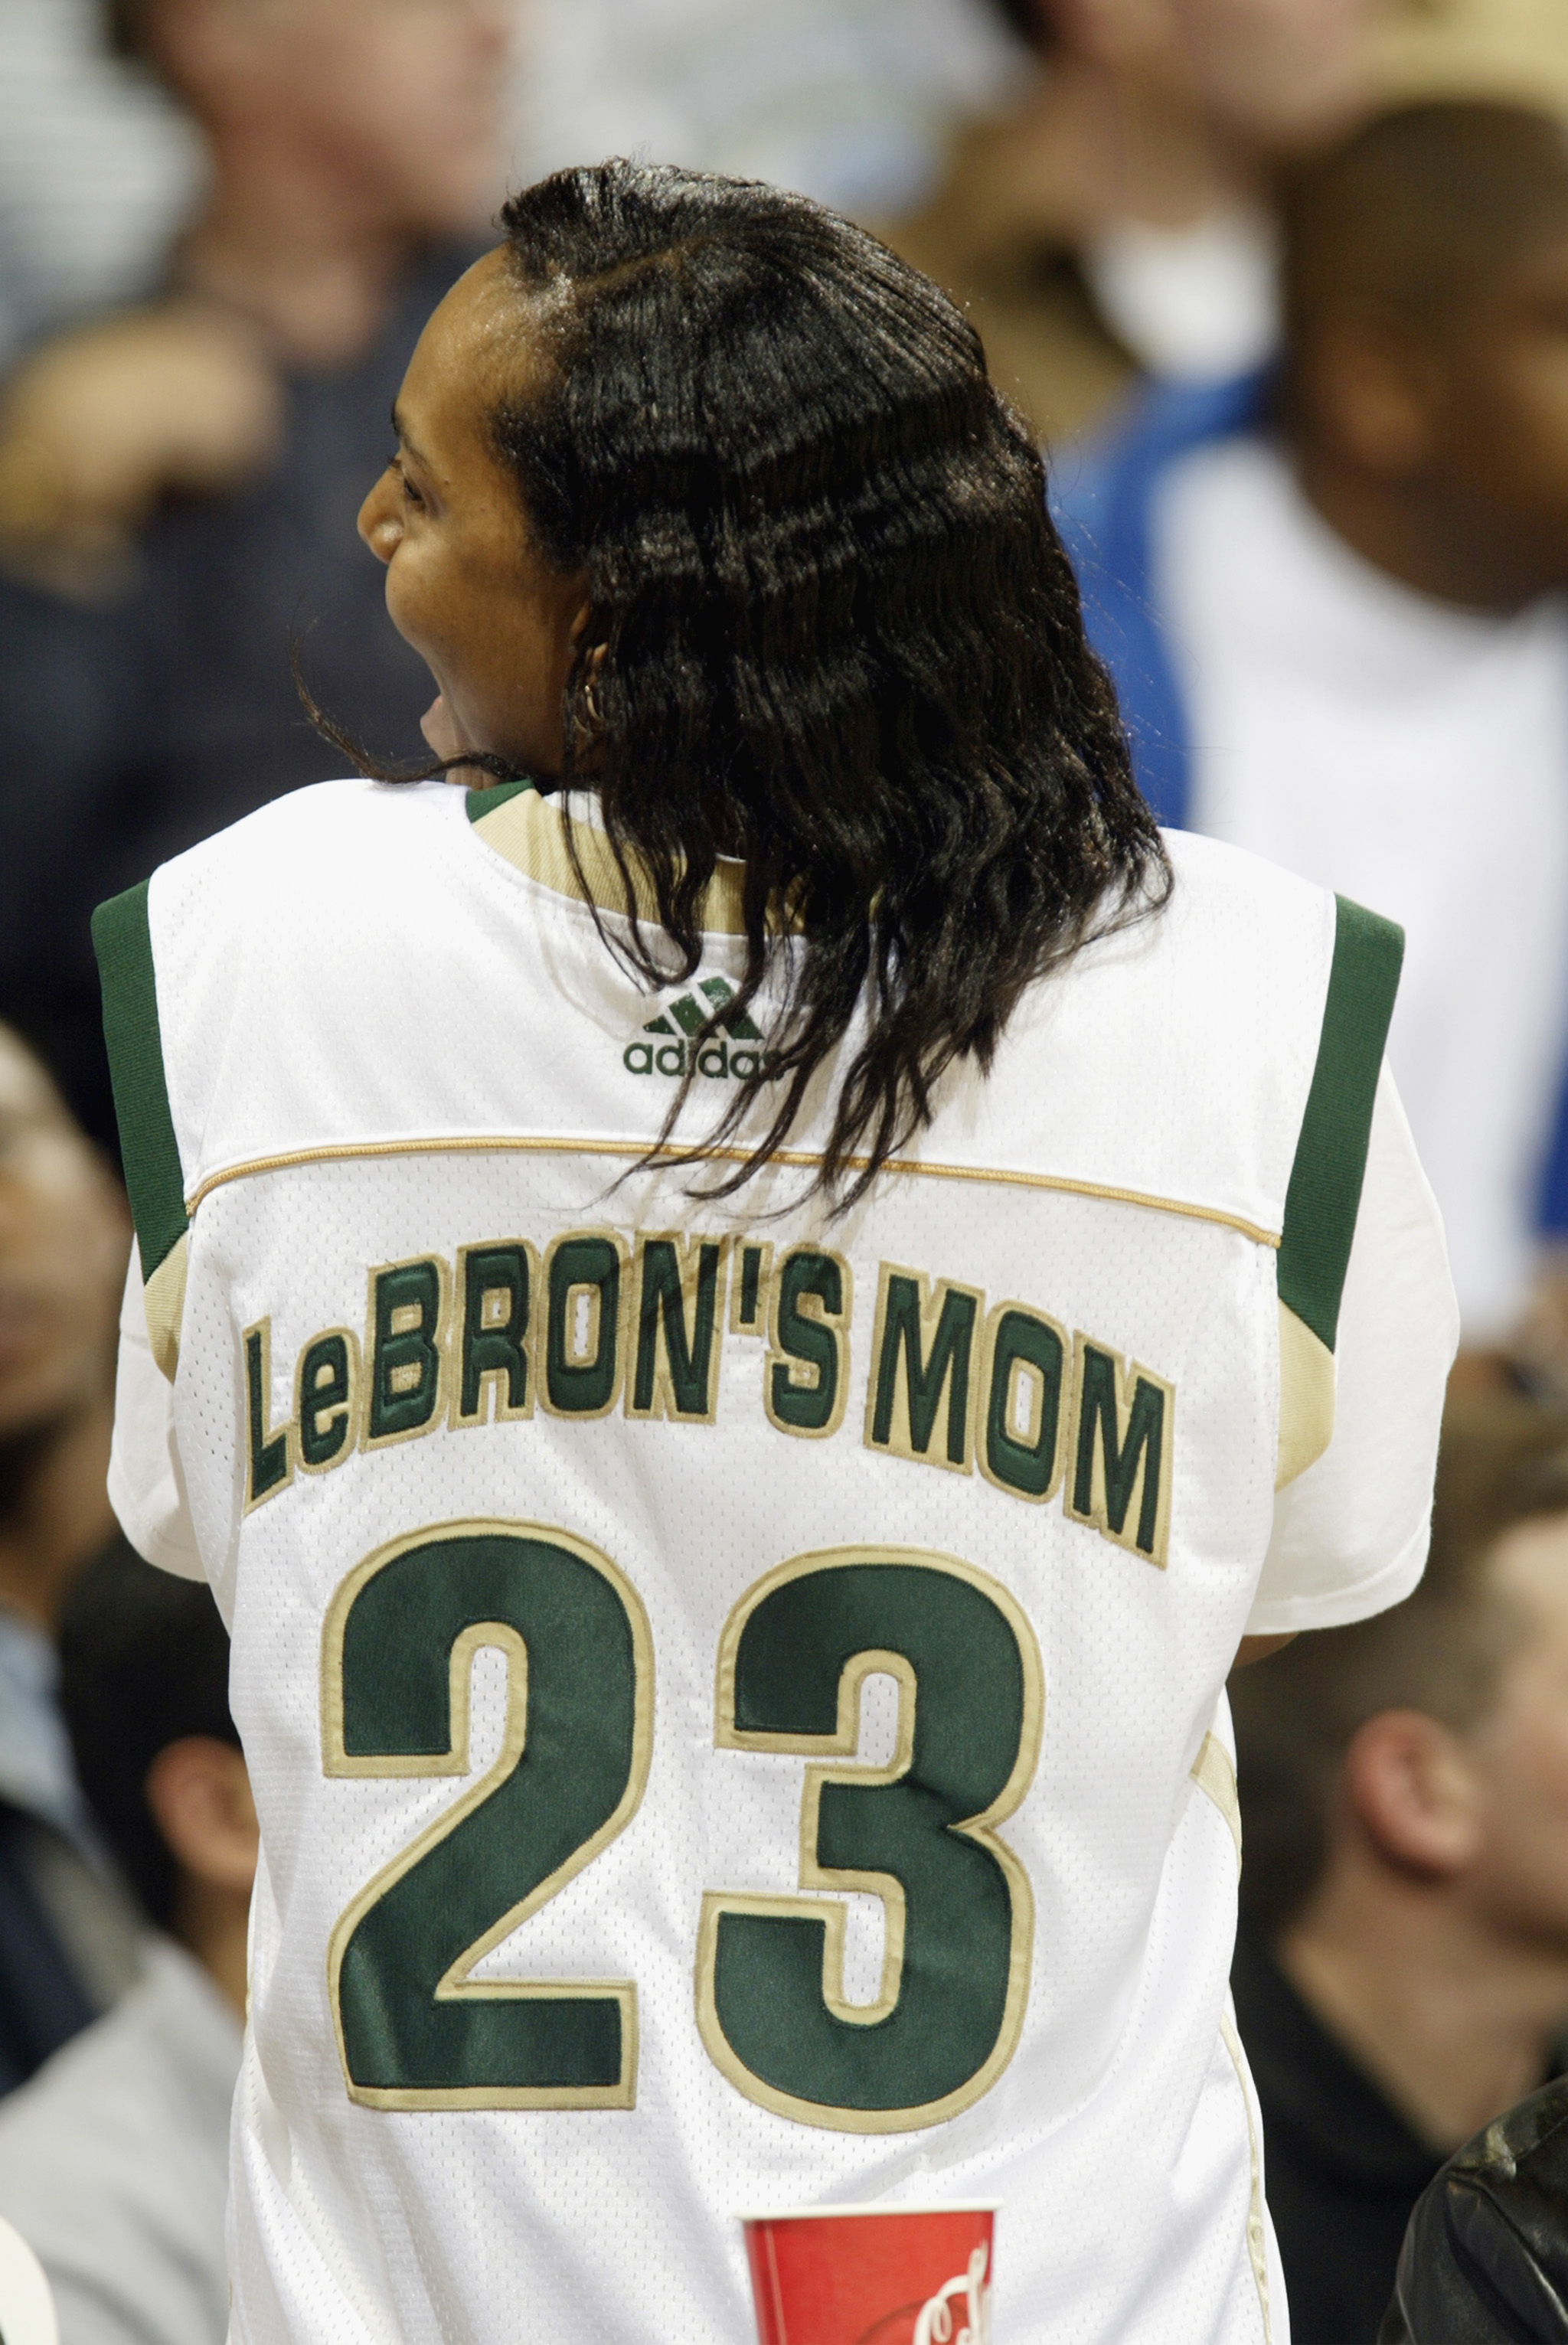 LeBron James' mom Gloria shows off her own team jersey during her son's high school St. Vincent-St. Mary's game against Mater Dei on January 4, 2003 in Los Angeles, California | Source: Getty Images